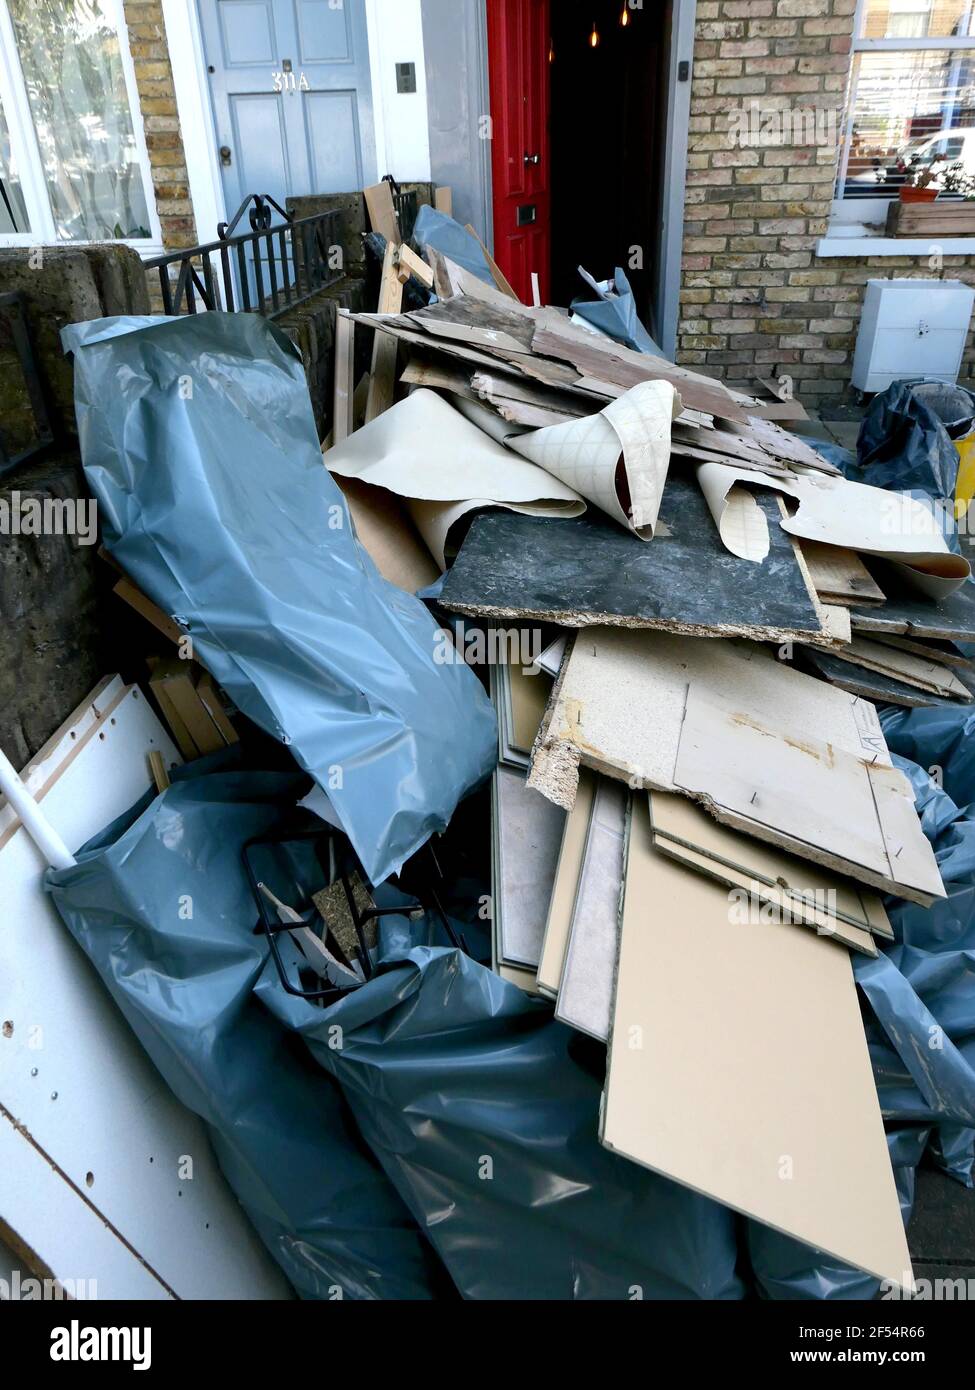 Builders' rubbish outside house being renovated in South London Stock Photo